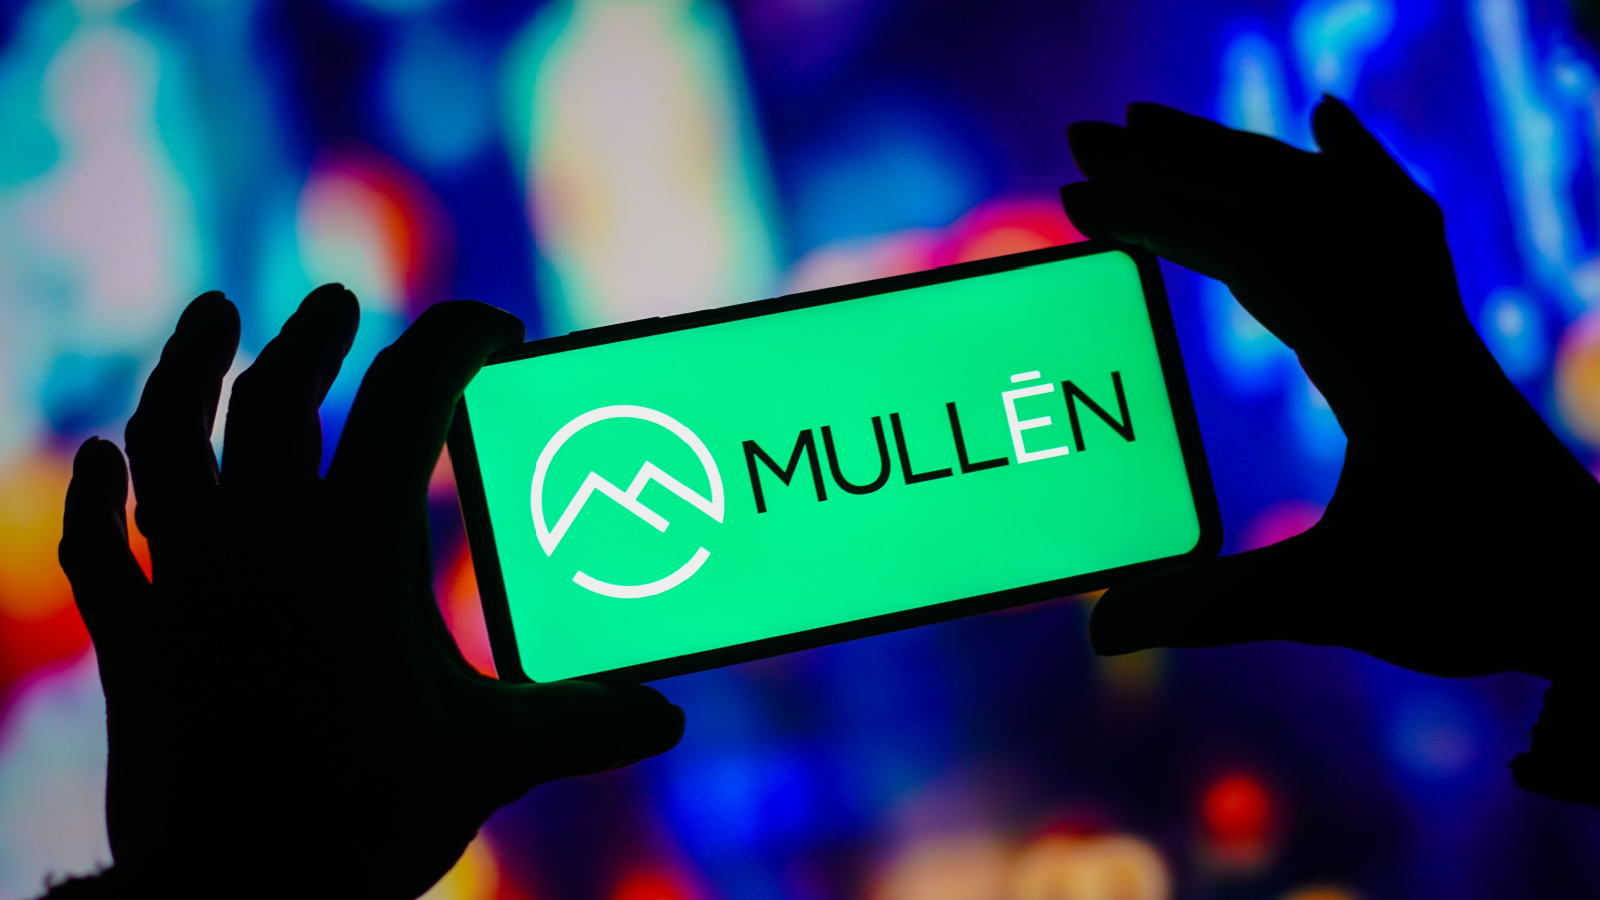 MULN Stock: There Are No Mullen Shares Available to Short